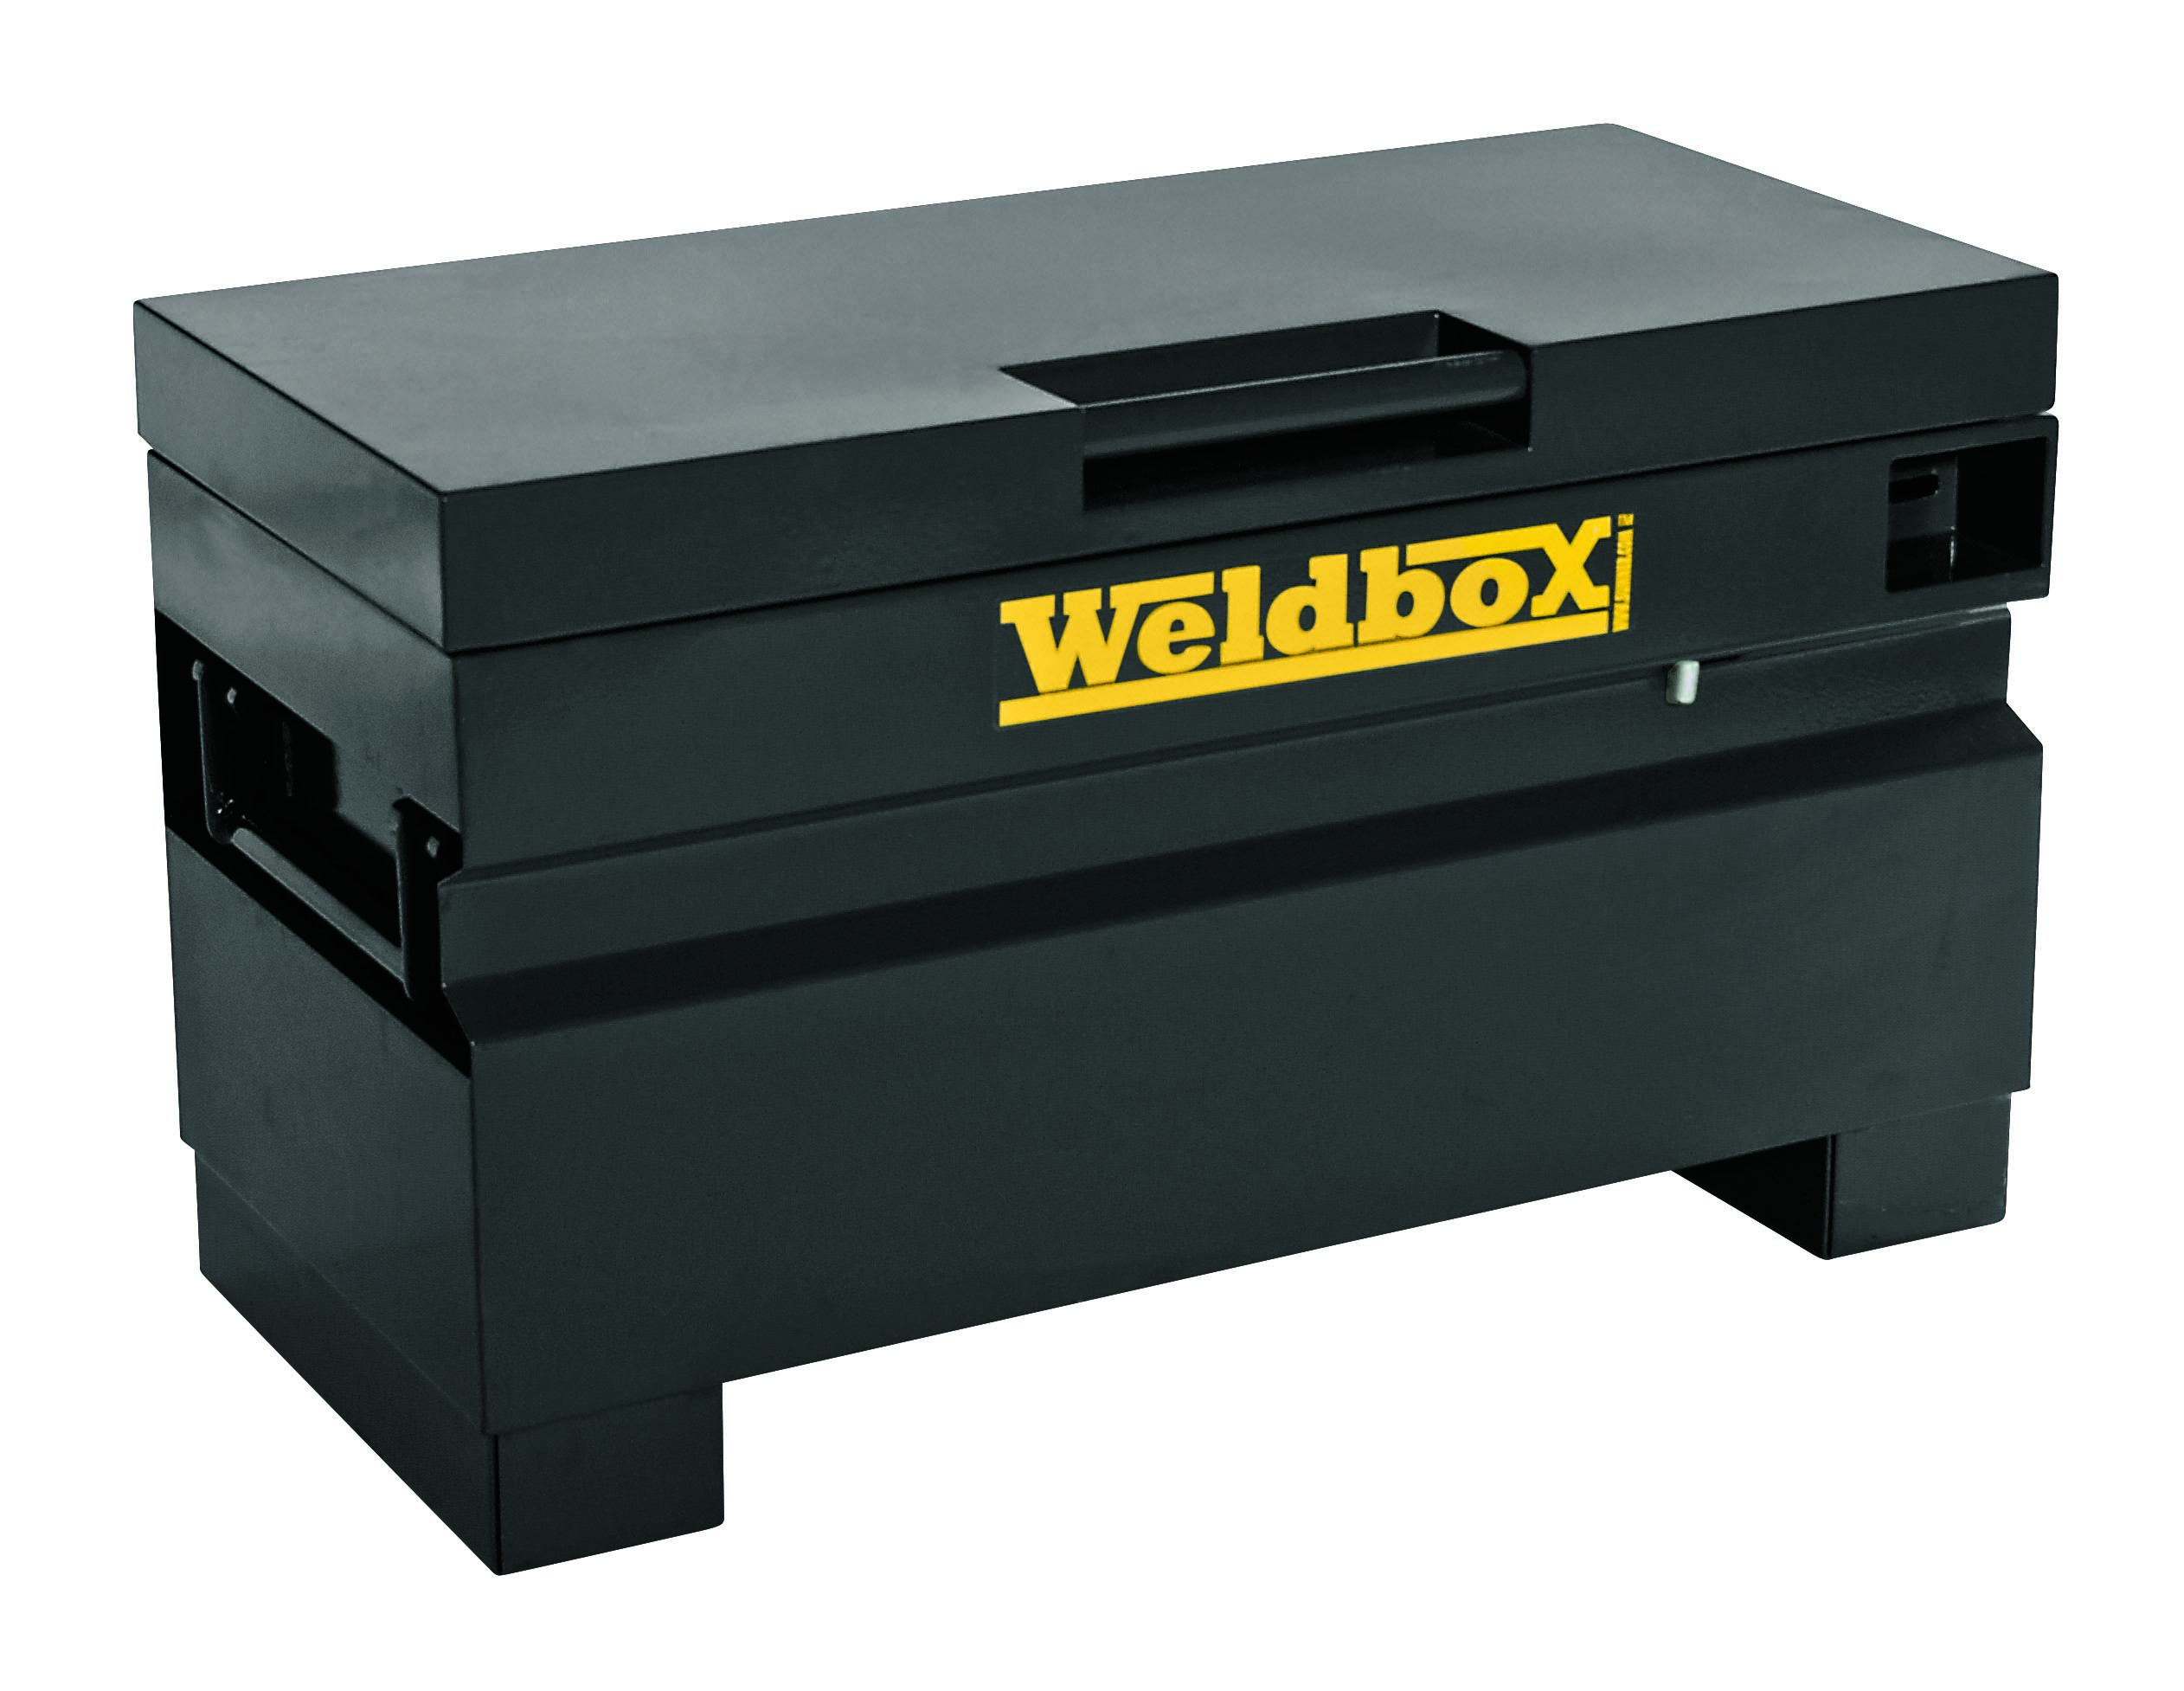 The Weldbox 3617 is made from 16 gauge steel and features a 2-point latching system that requires only 1 lock.